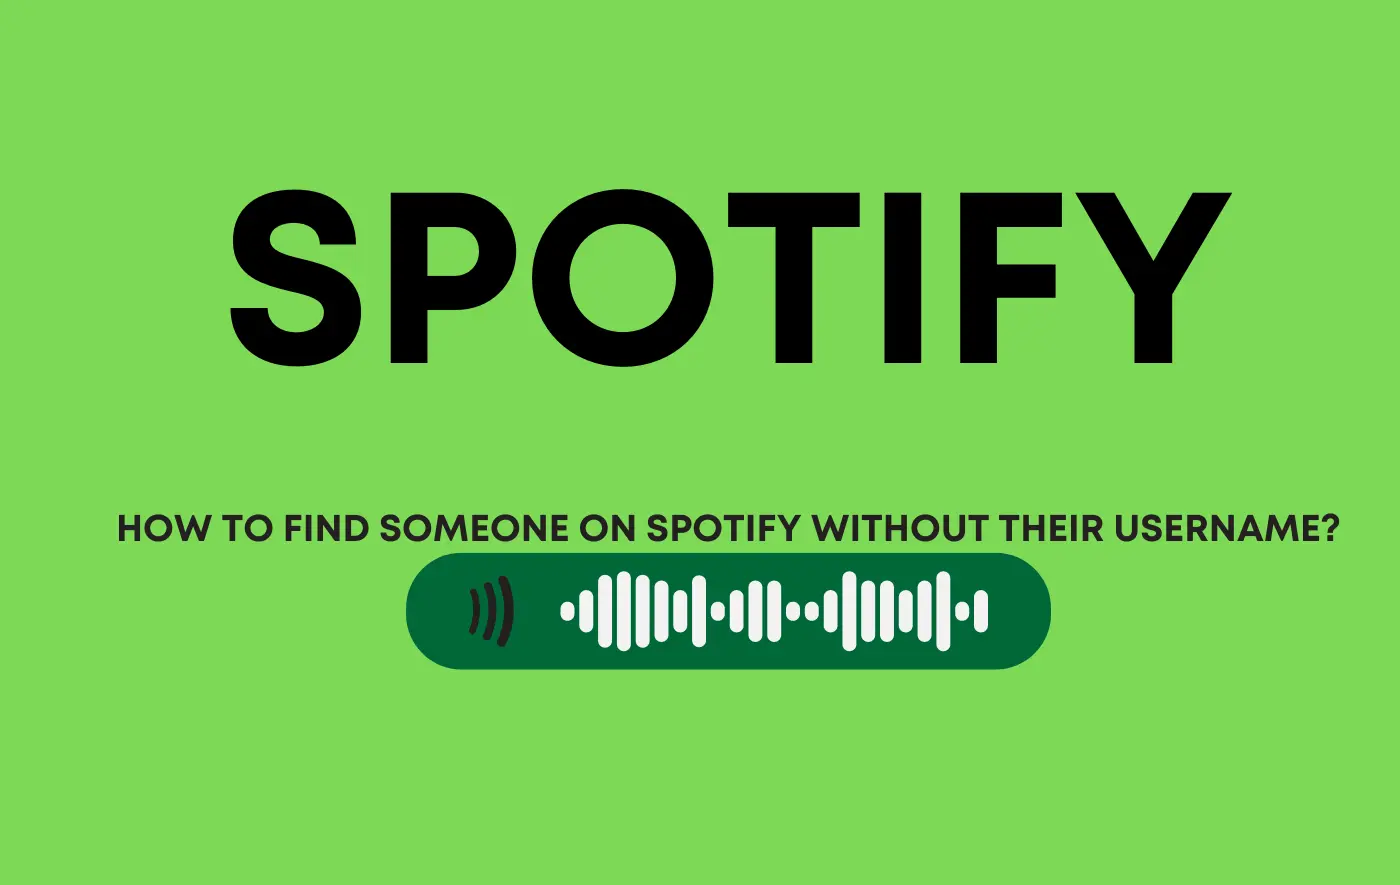 How To Find Someone On Spotify Without Their Username?